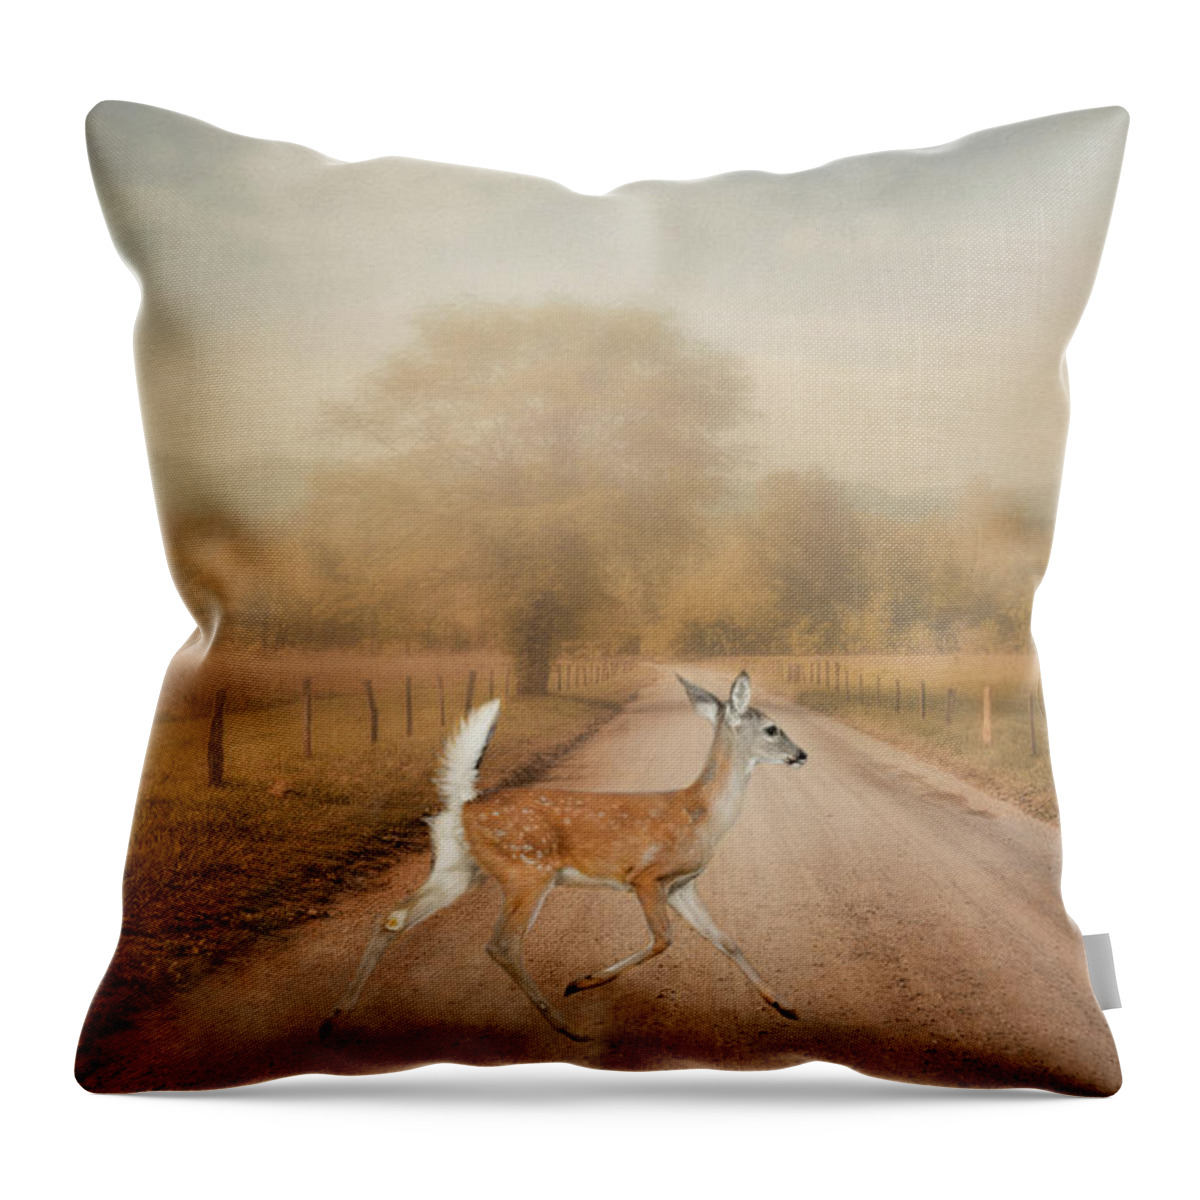 Deer Throw Pillow featuring the photograph Morning Crossing by Jai Johnson